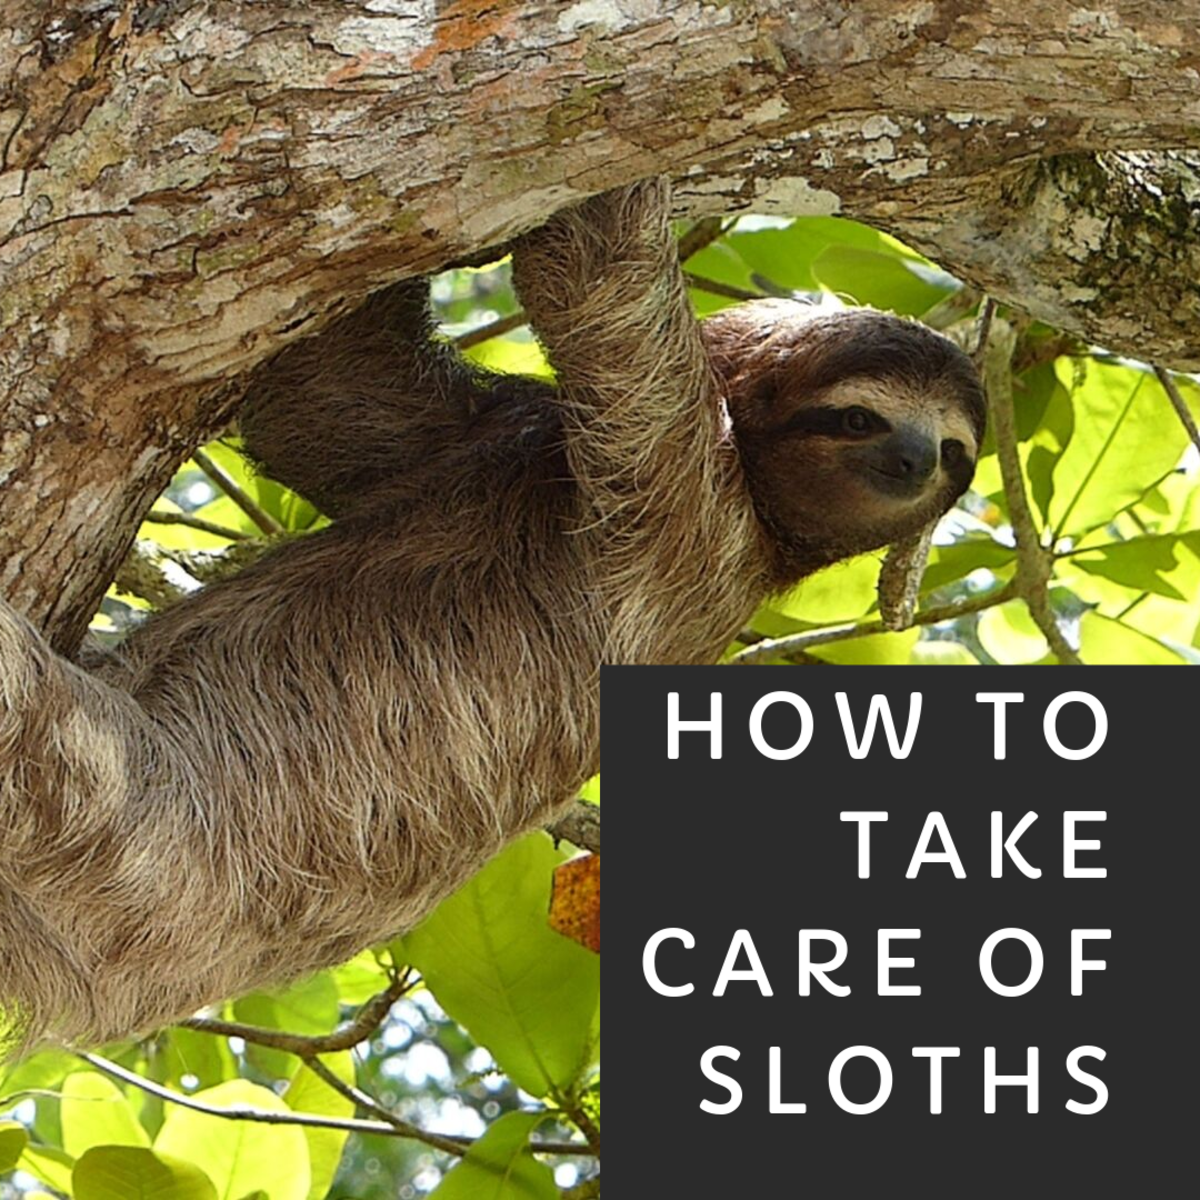 How to Take Care of a Sloth